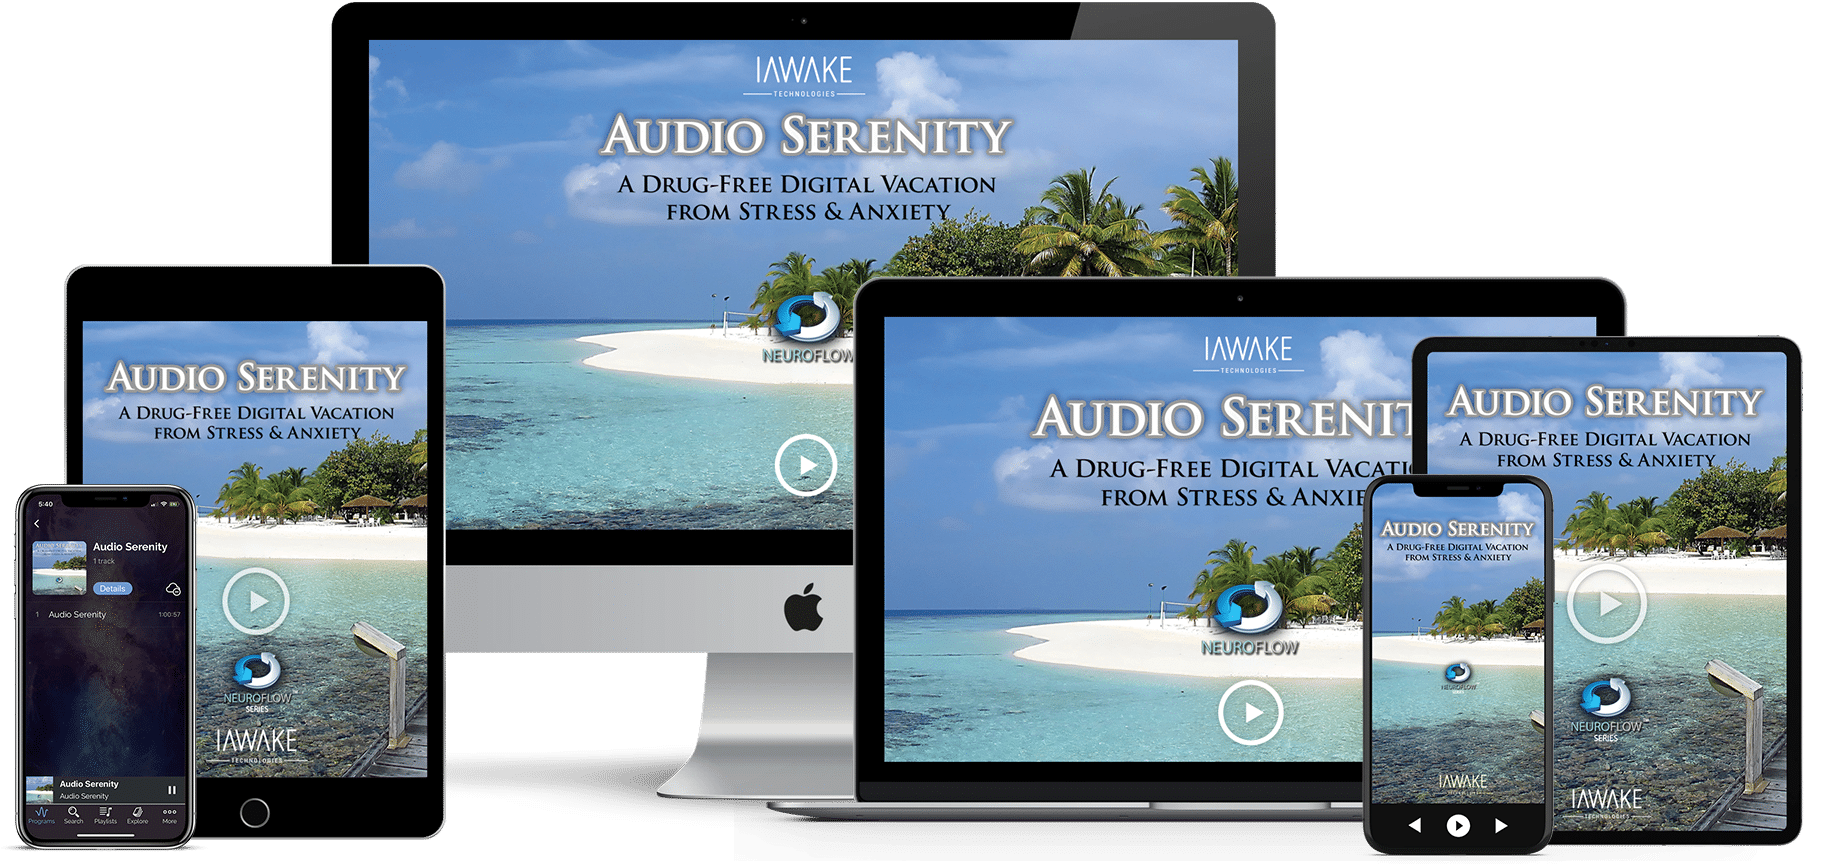 Audio Serenity (A Drug-Free Digital Vacation from Stress and Anxiety) - iAwake Technologies